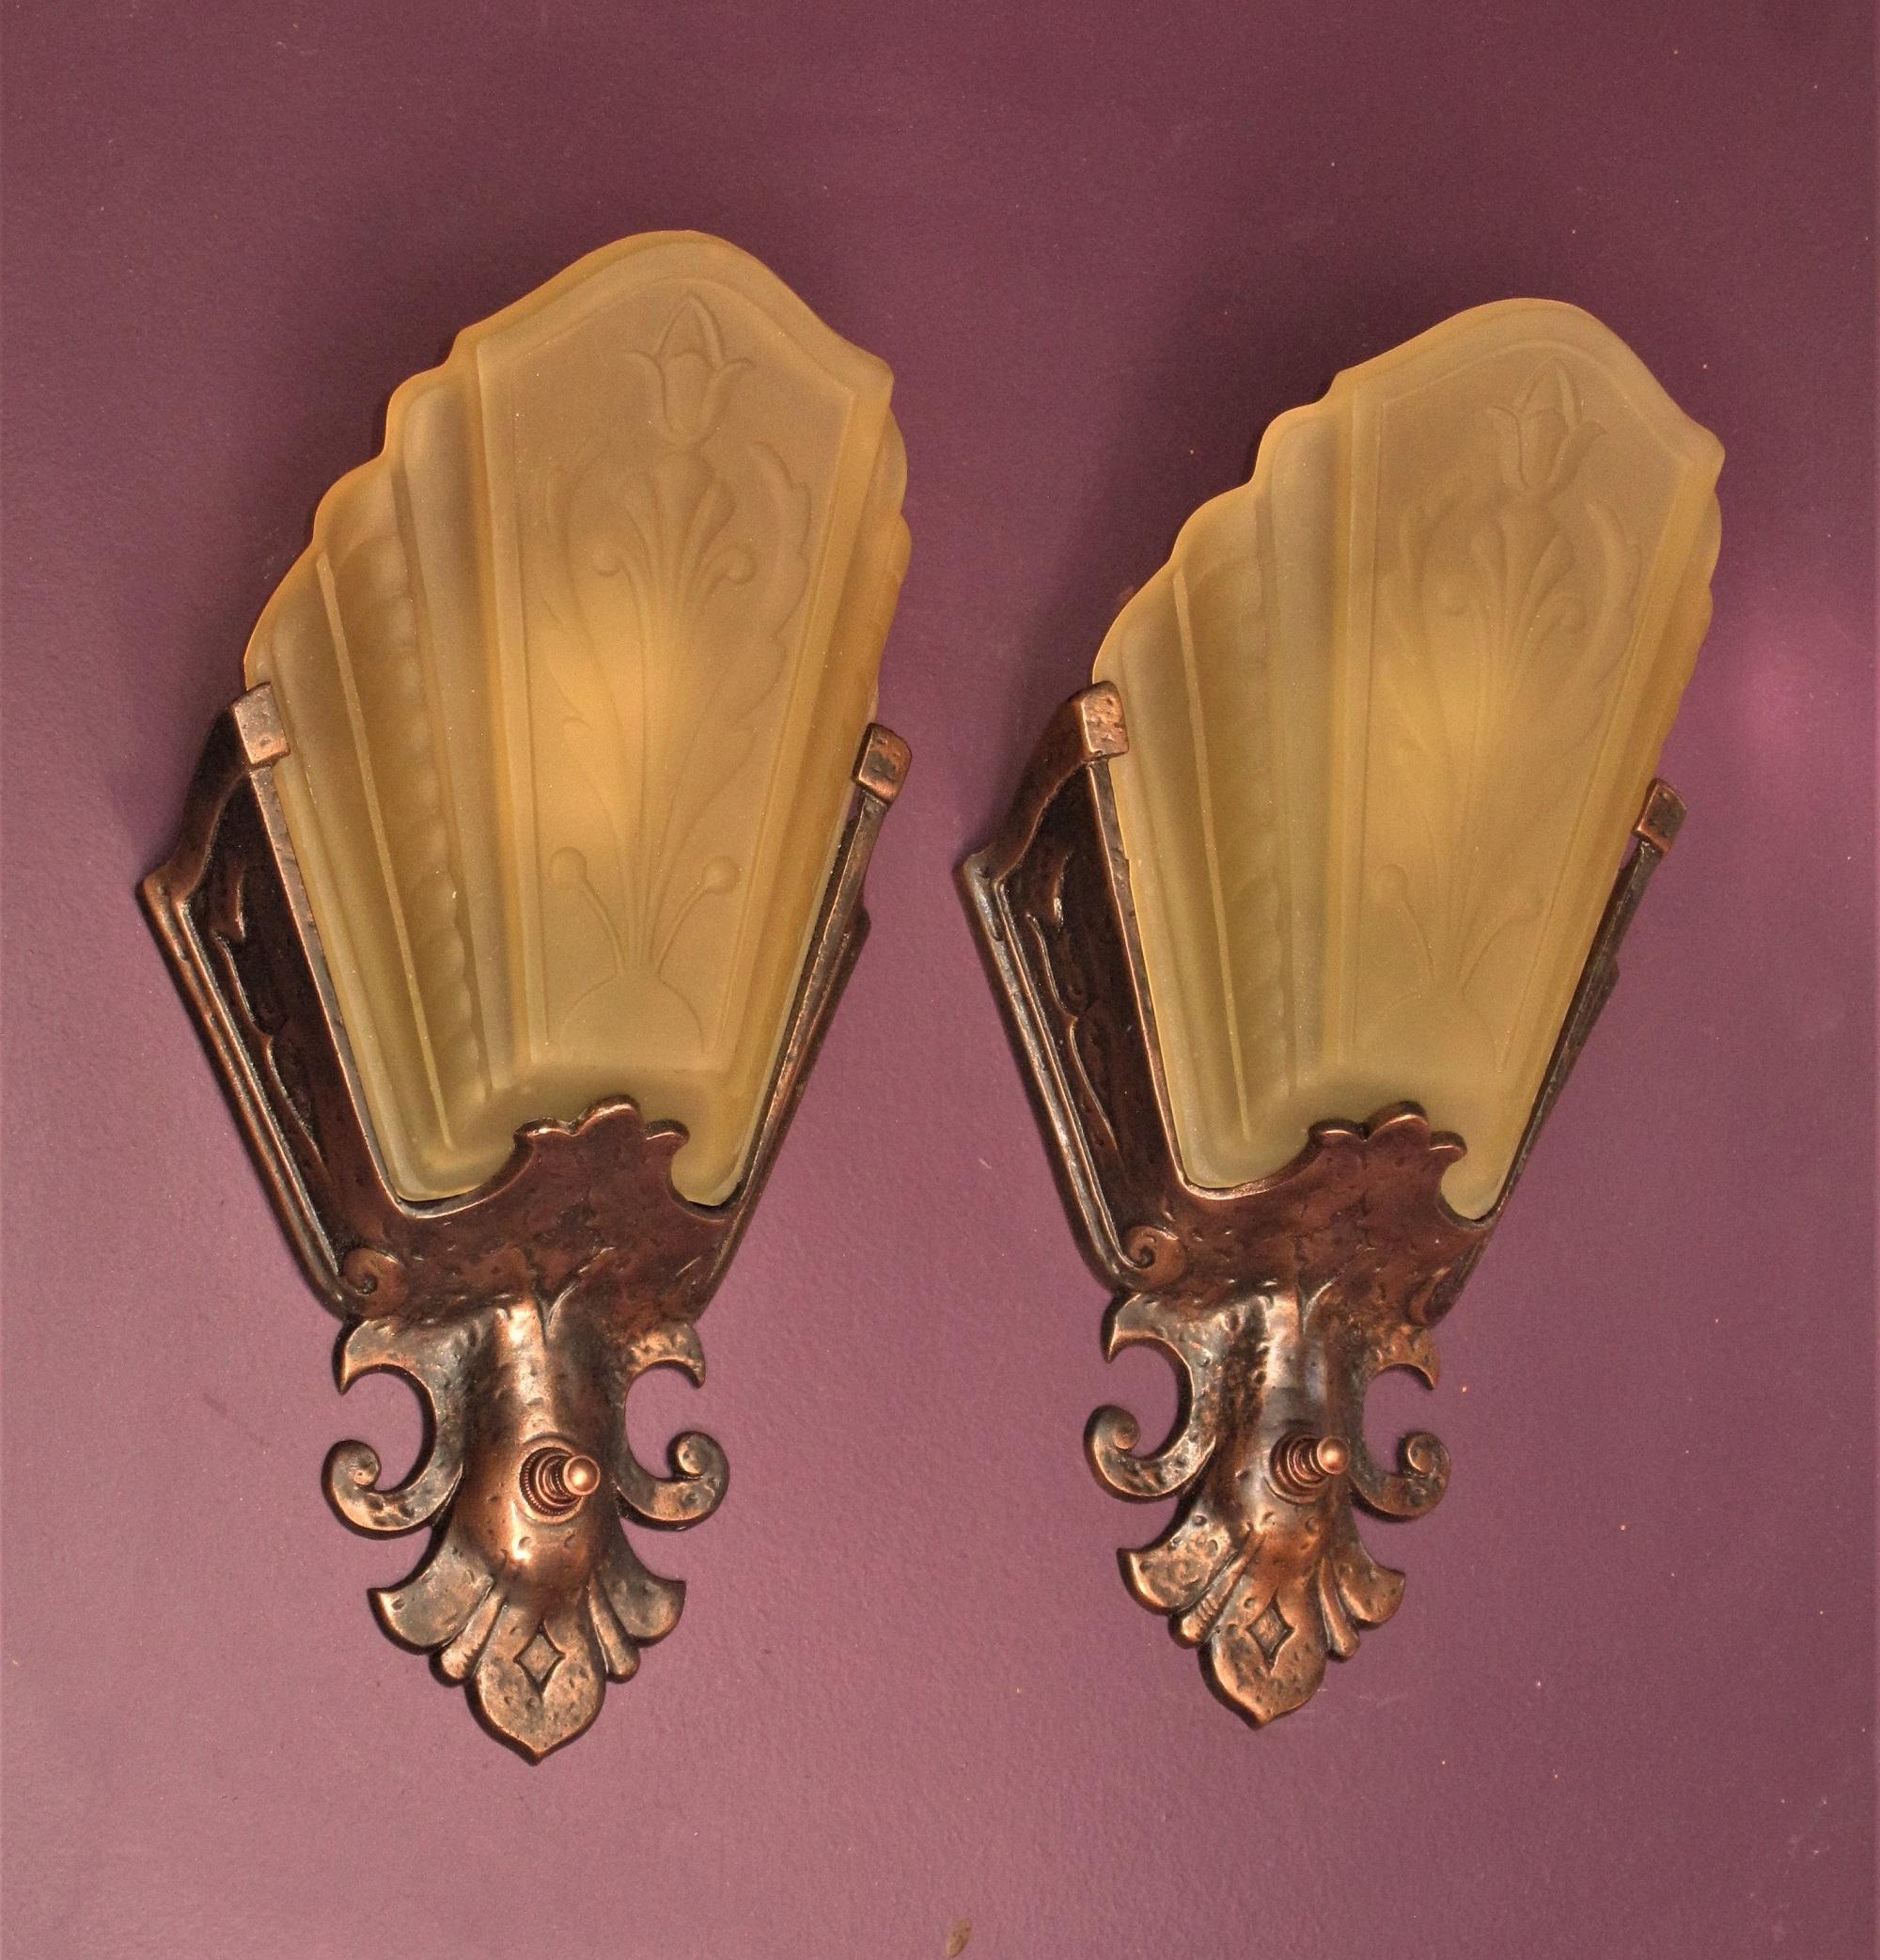 Priced per pair with three available (1 & 1/2 pair).  Single at 1/2 pair price.
A great pair of vintage wall sconces from the early 30s. What makes these antique sconces so unique is the design elementation. Although they have some art deco